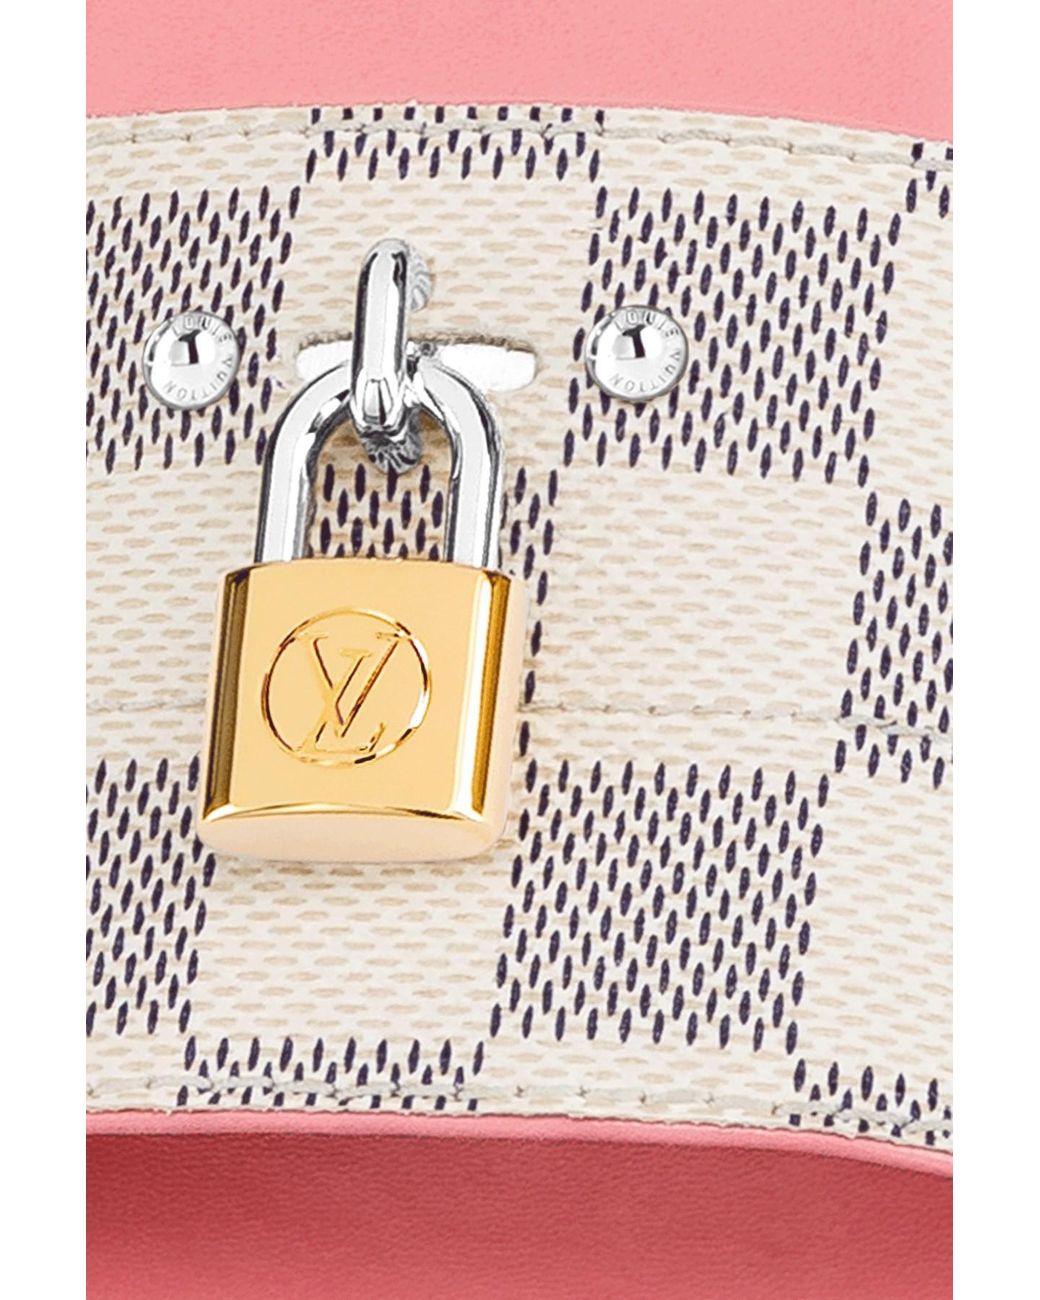 fifthaveshoes shared a photo on Instagram: “Louis Vuitton lock it